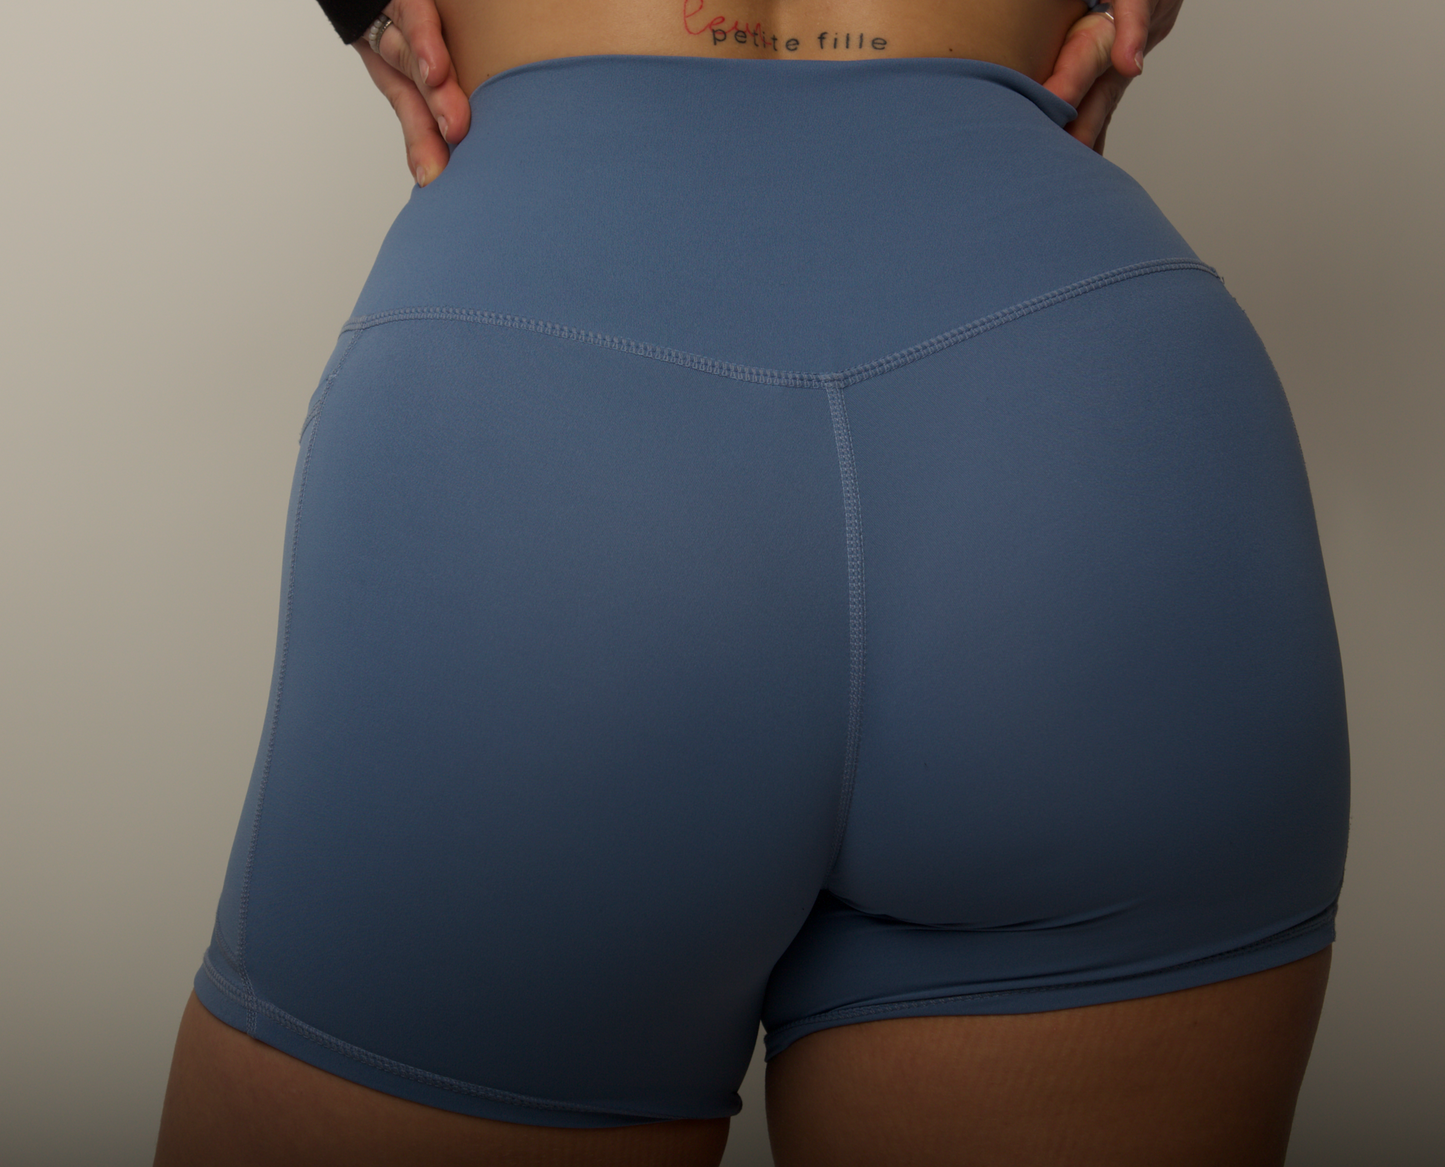 Dusty Blue Sculpting Sports Shorts: Lift and Contour